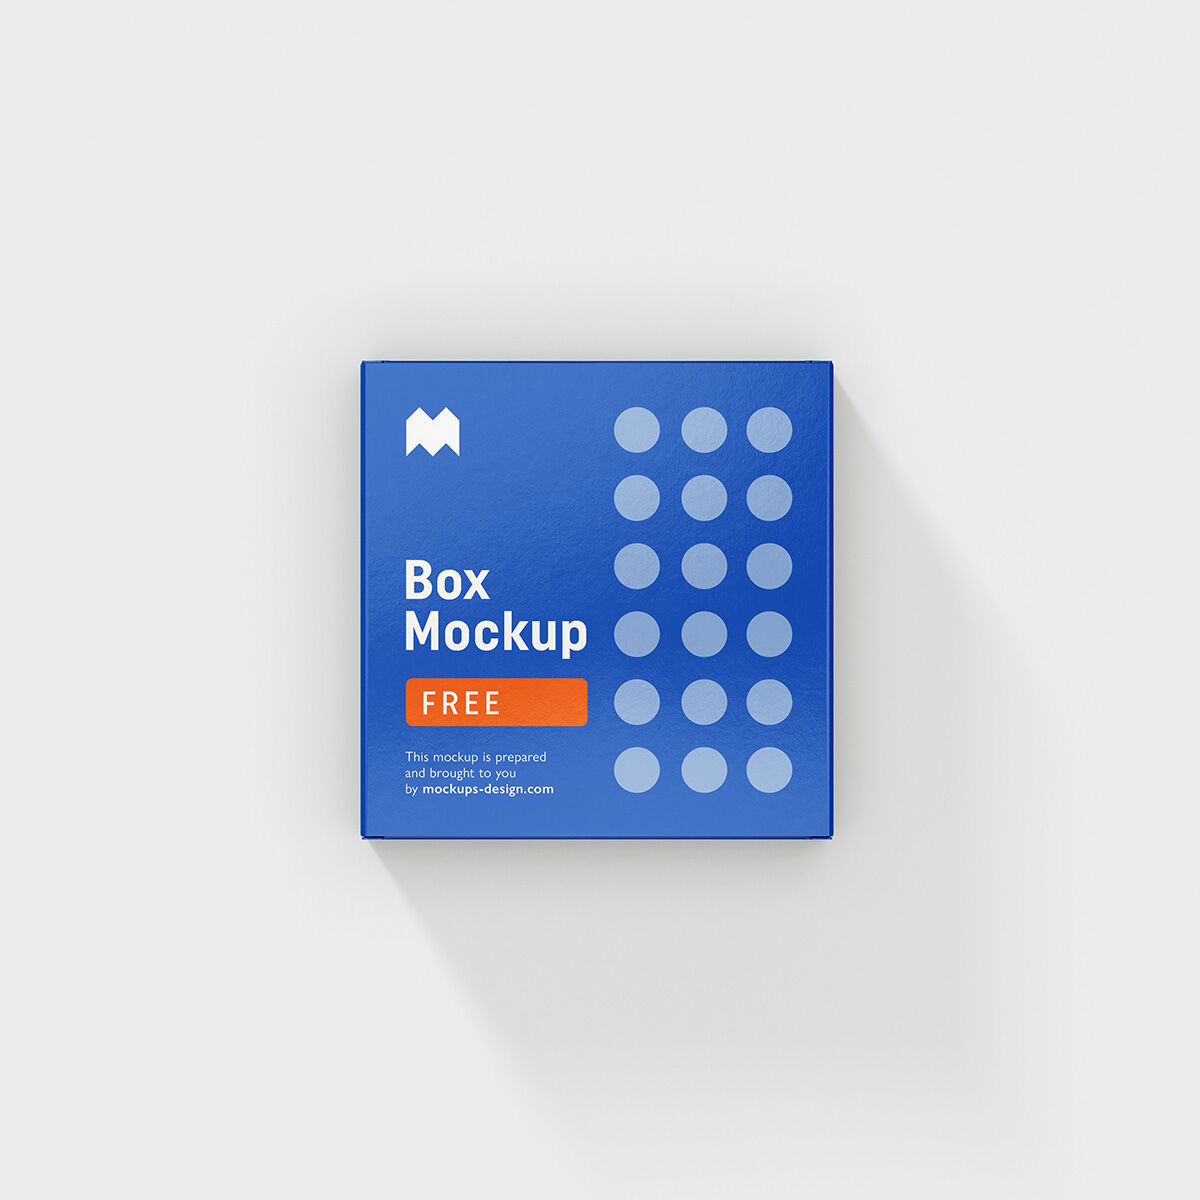 Six Realisitic Box Mockups from Different Angles FREE PSD